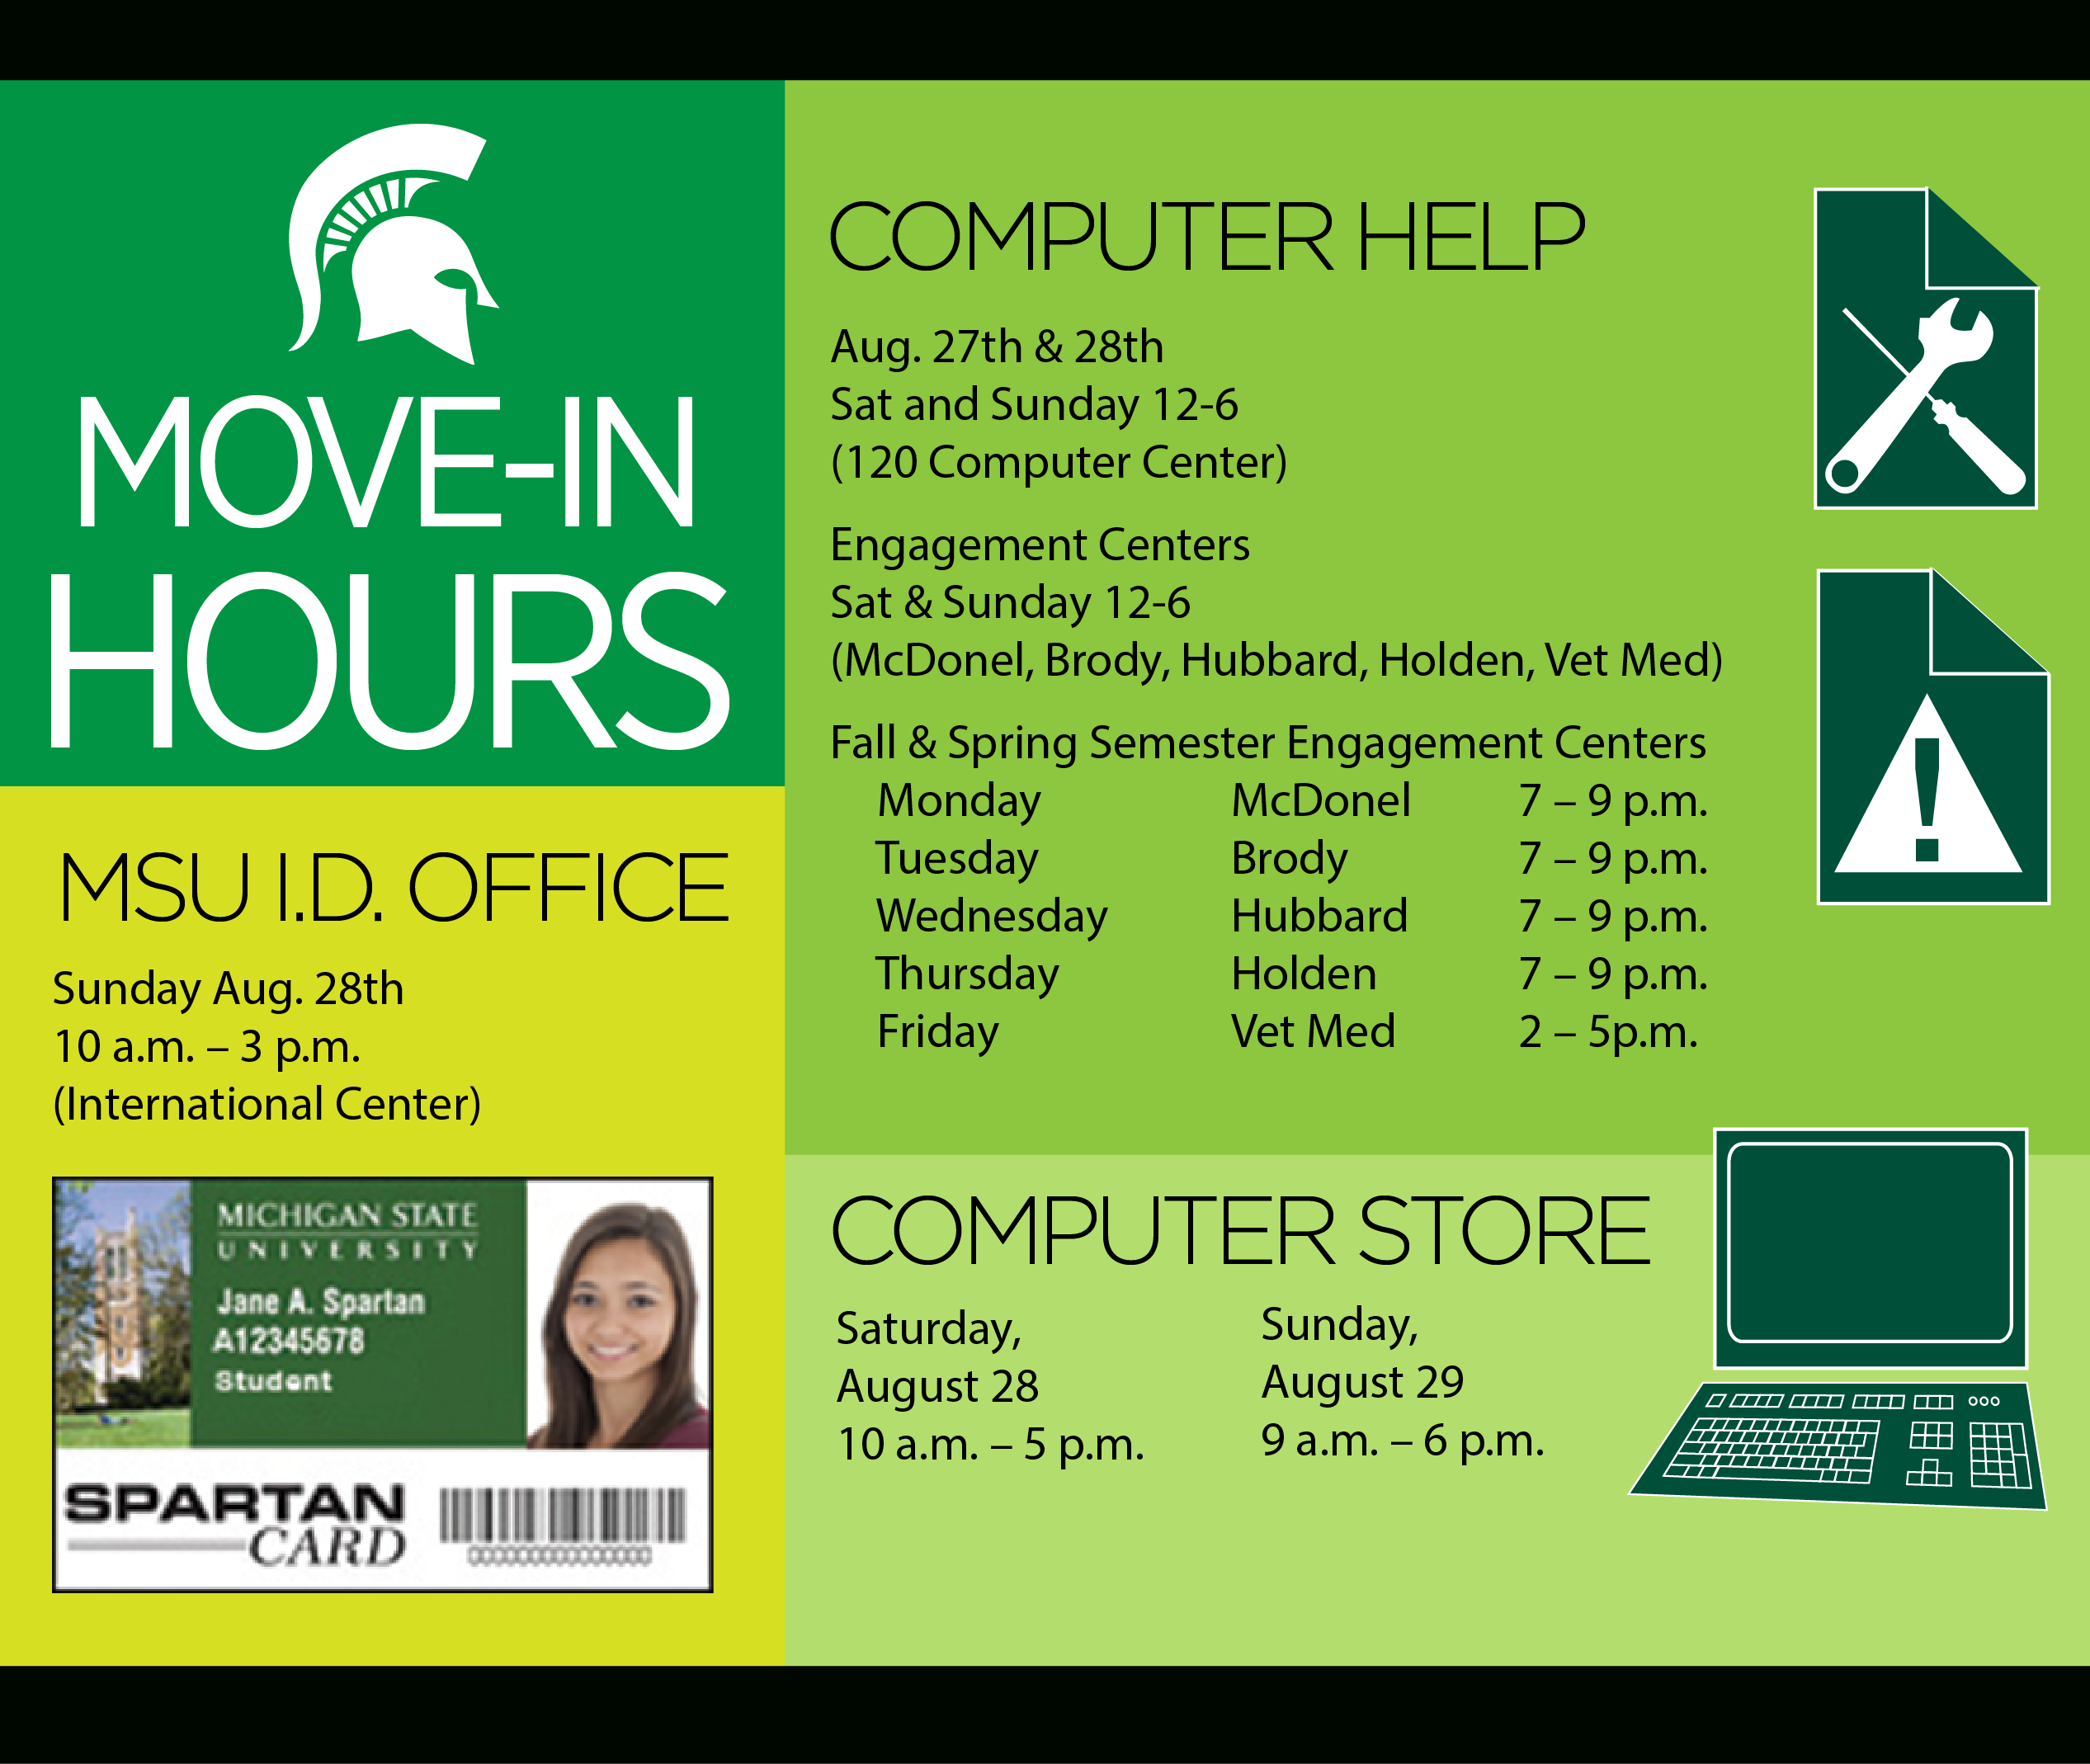 welcome back hours, full hours listed in blog text